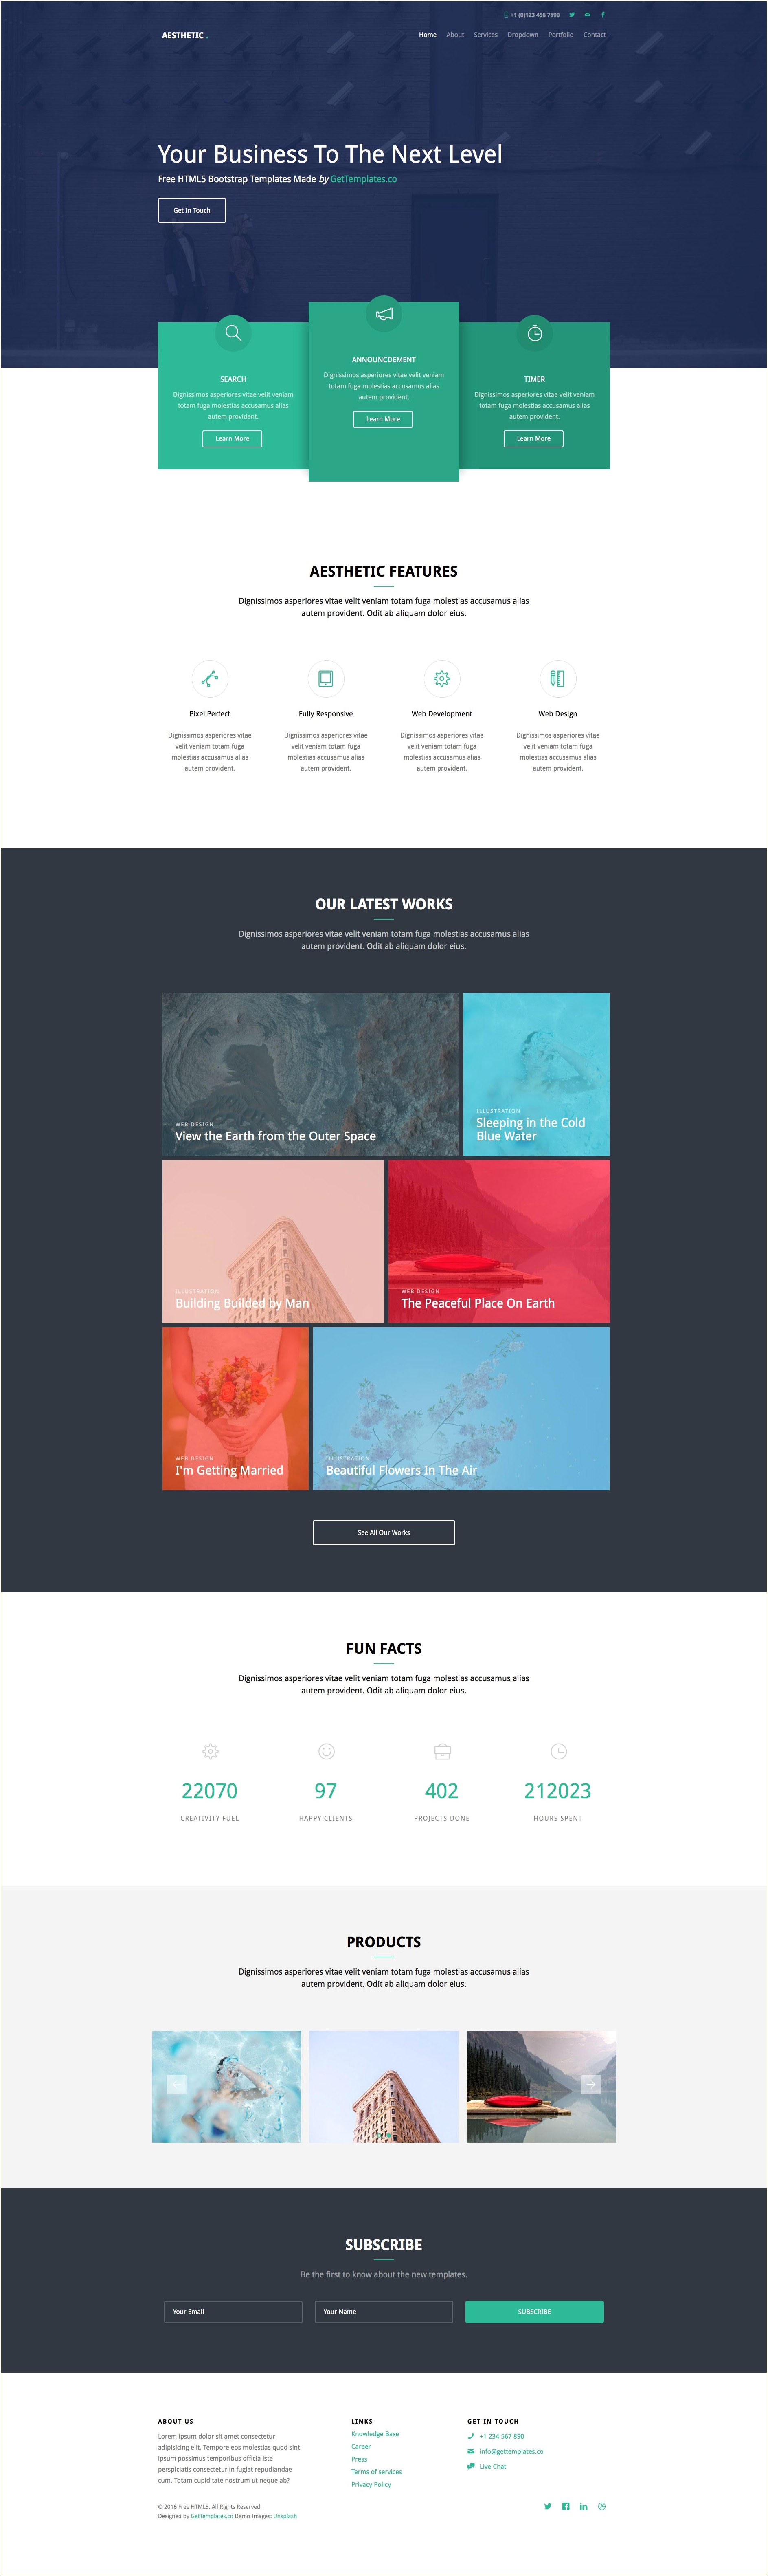 Bootstrap Landing Page With Form Template Free Download